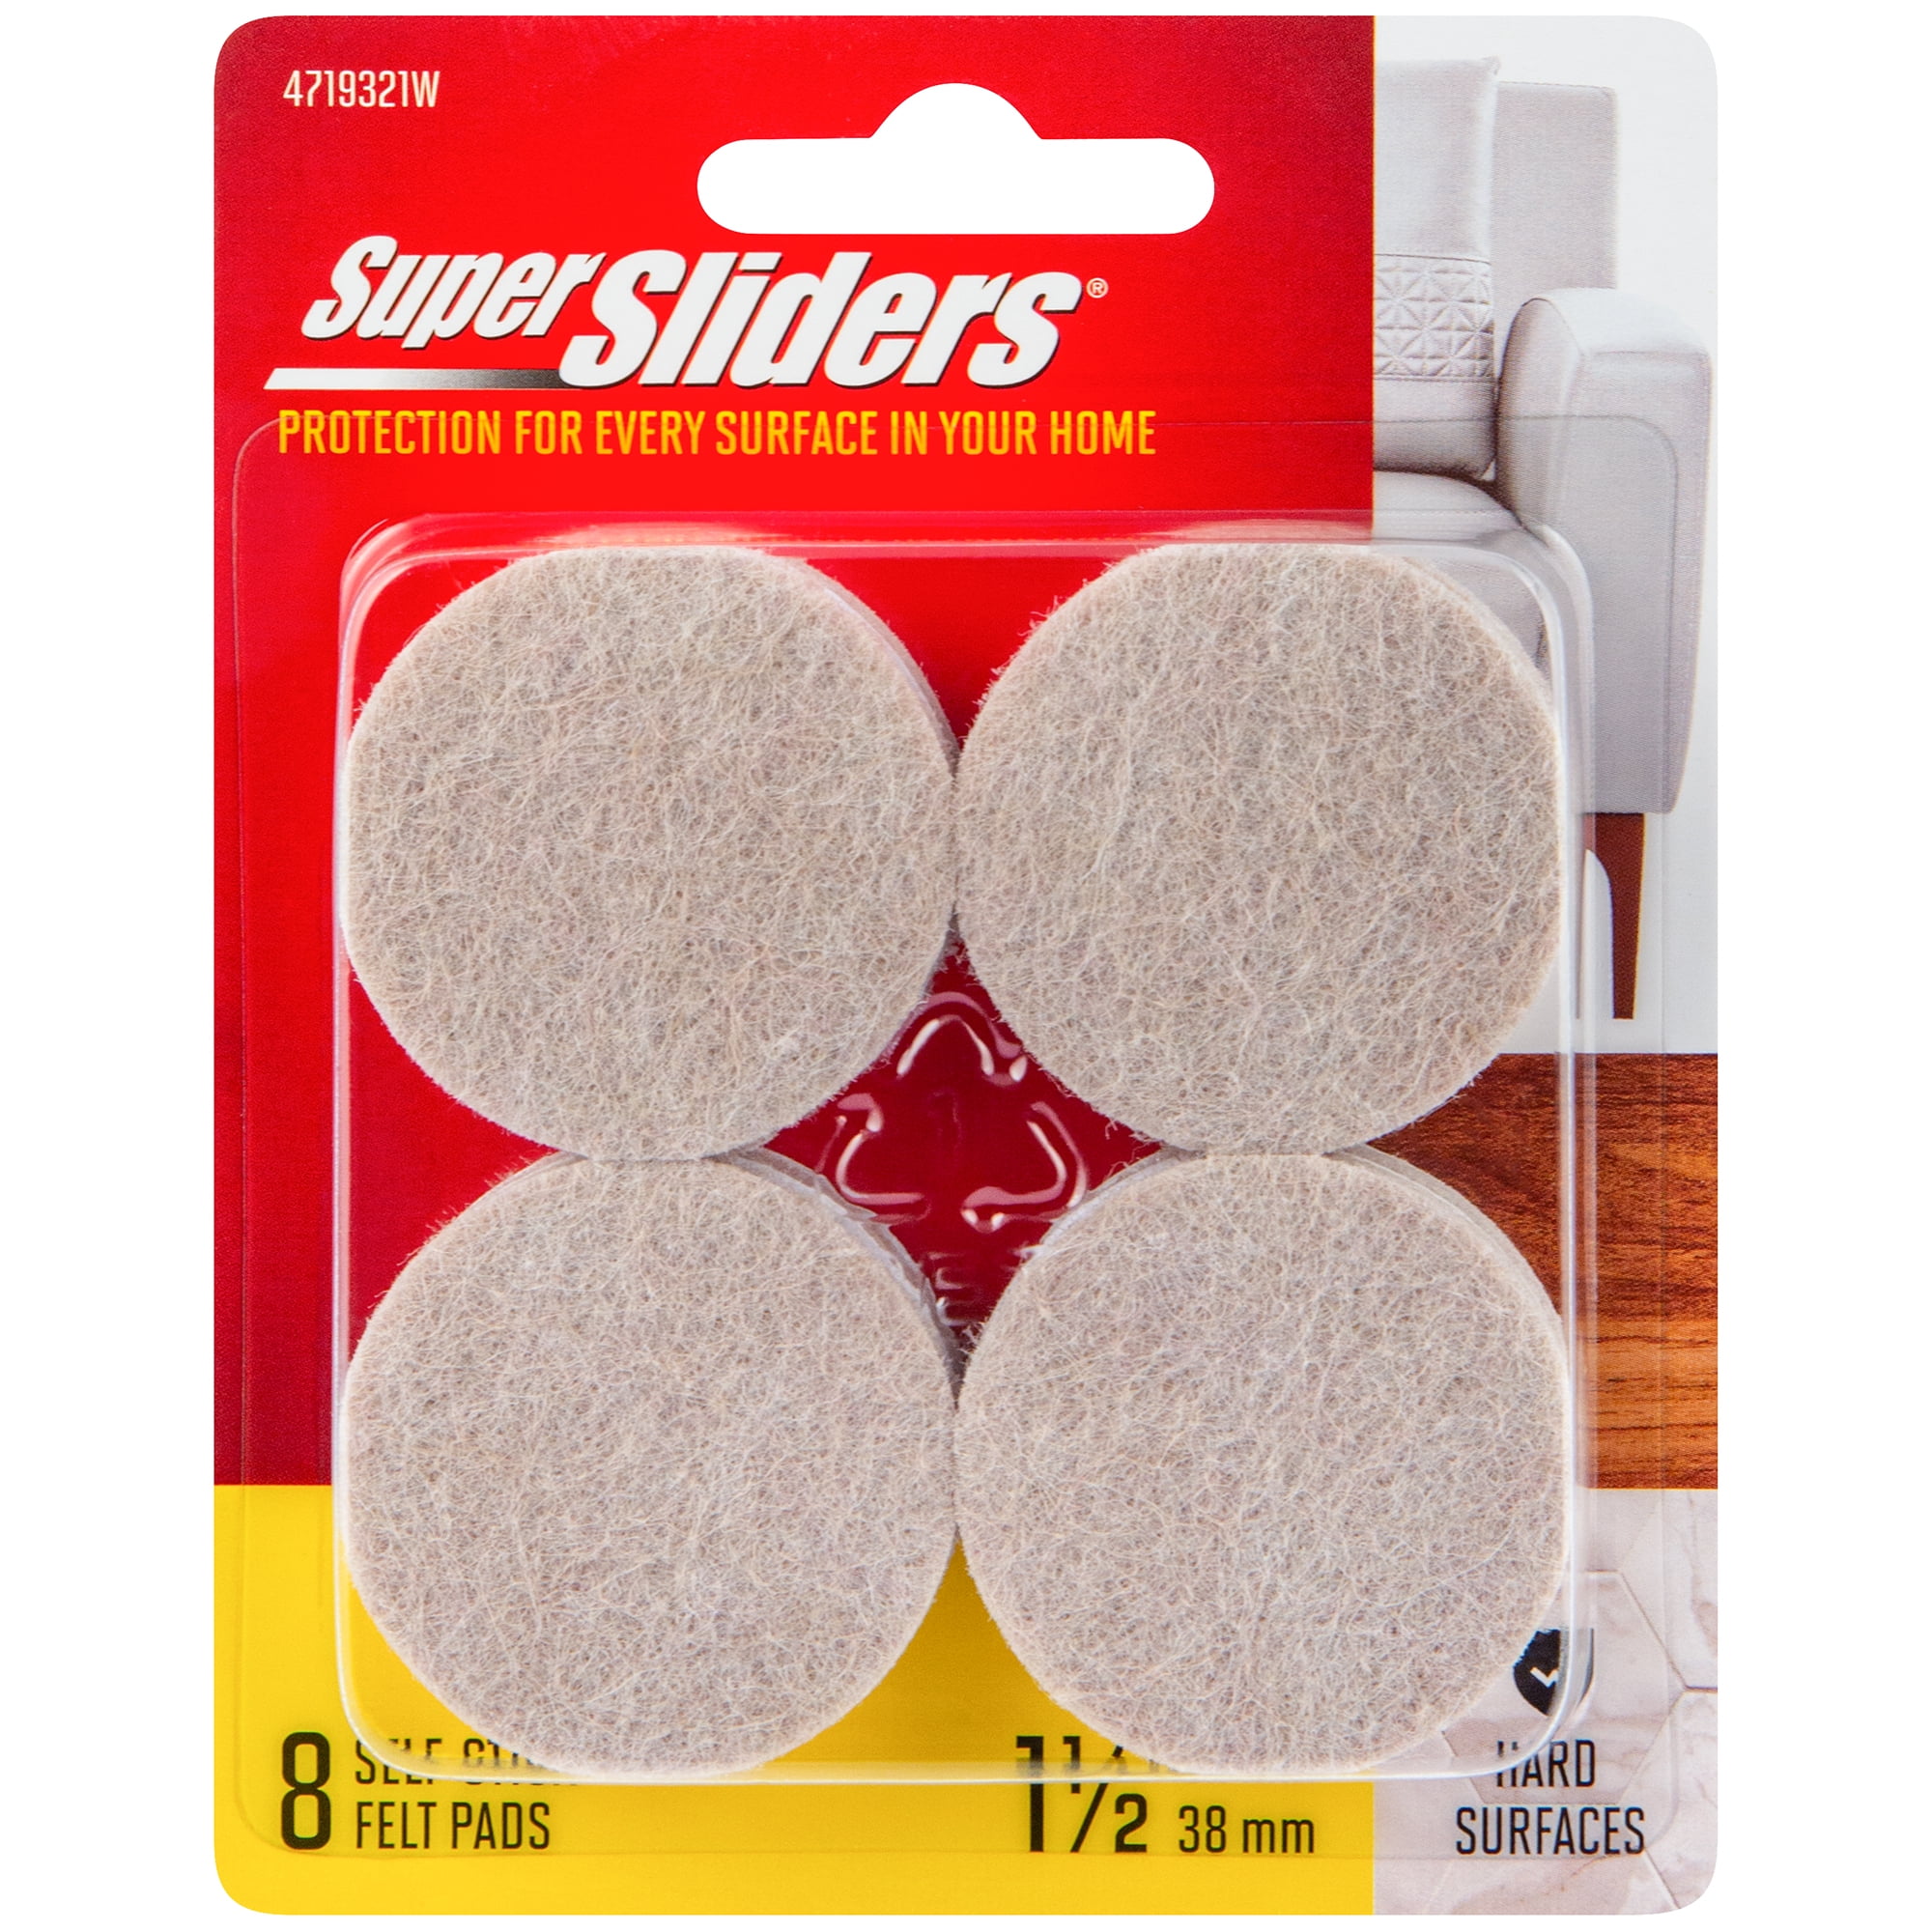 50 OF 5/8 inch 15mm X 4mm SELF ADHESIVE FELT PADS FOR WOODEN FLOOR PROTECTION 